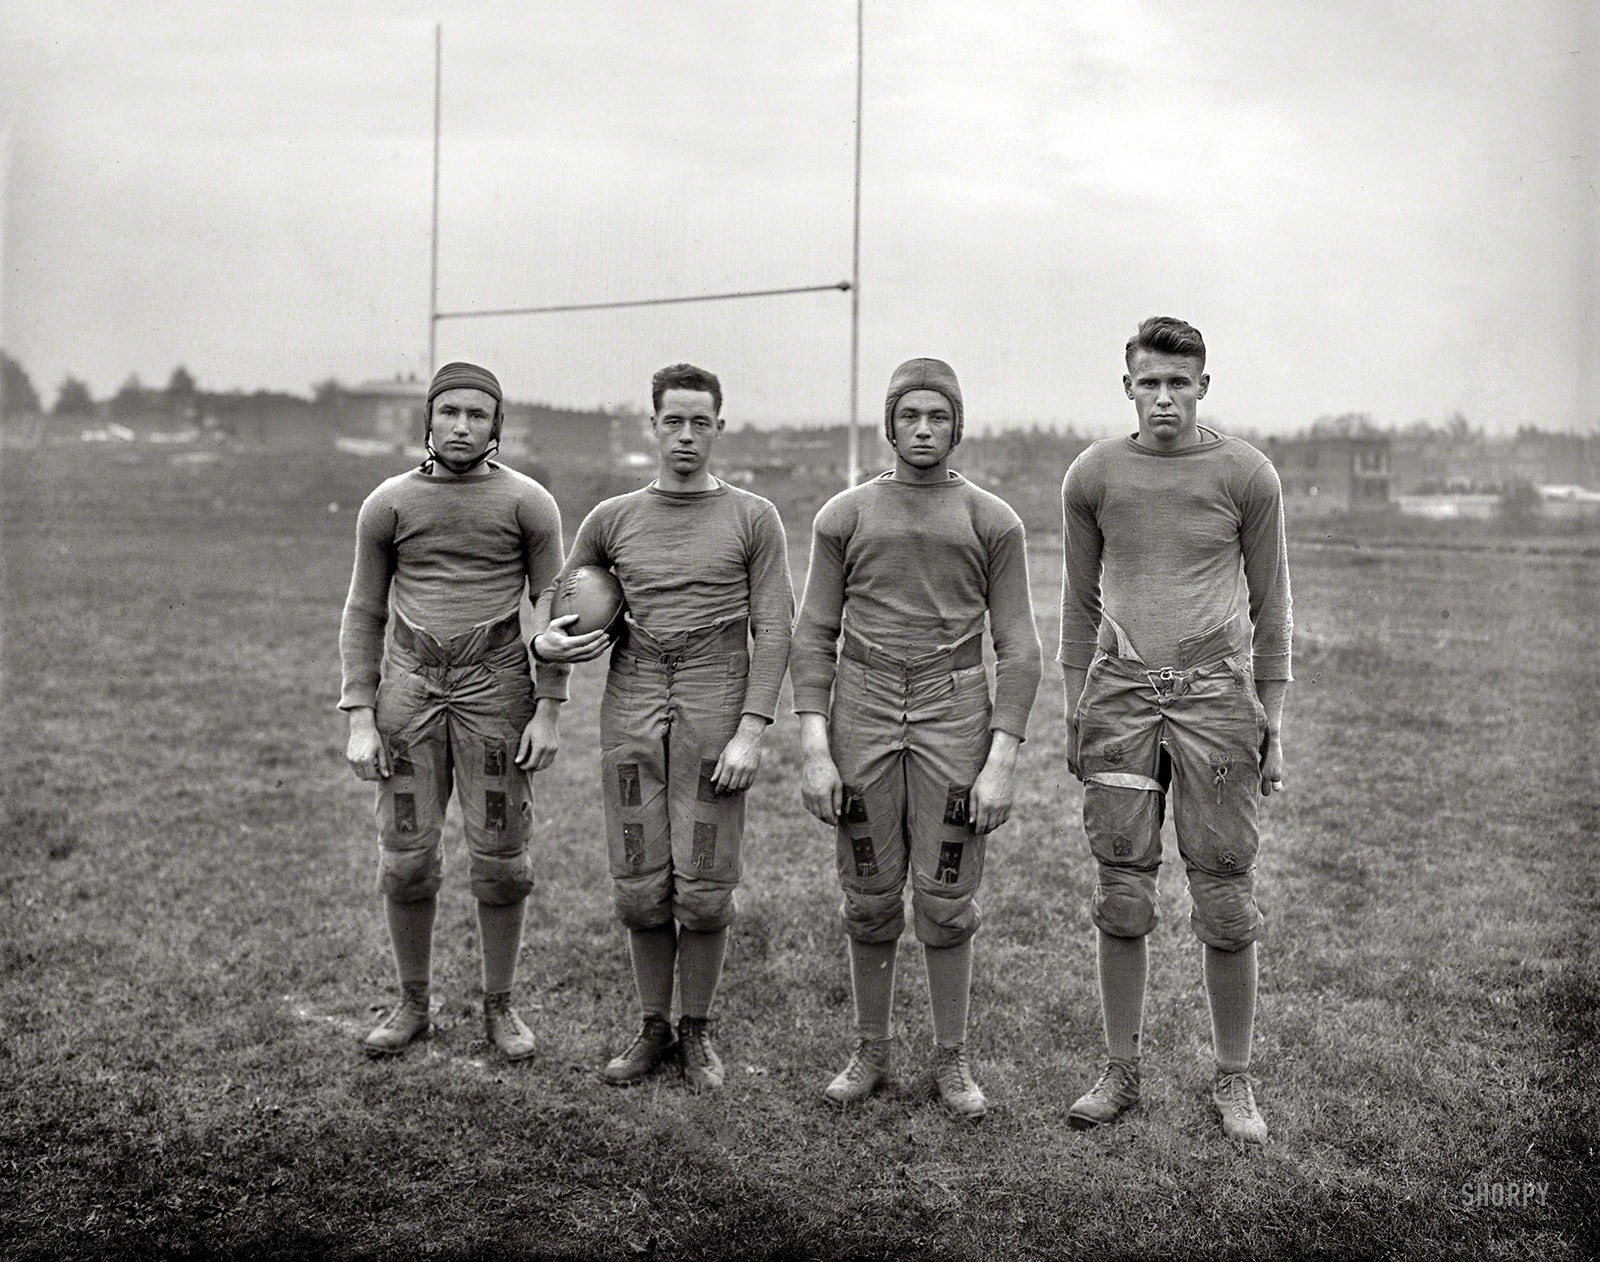 Washington, D.C., 1920. "Gripp, Mathew, [Nathan] Lahn, Troske -- Gallaudet U." Gridiron stars of the first college for the deaf, credited with inventing the football huddle in the 1920s as a way to keep its signed plays secret. View full size.